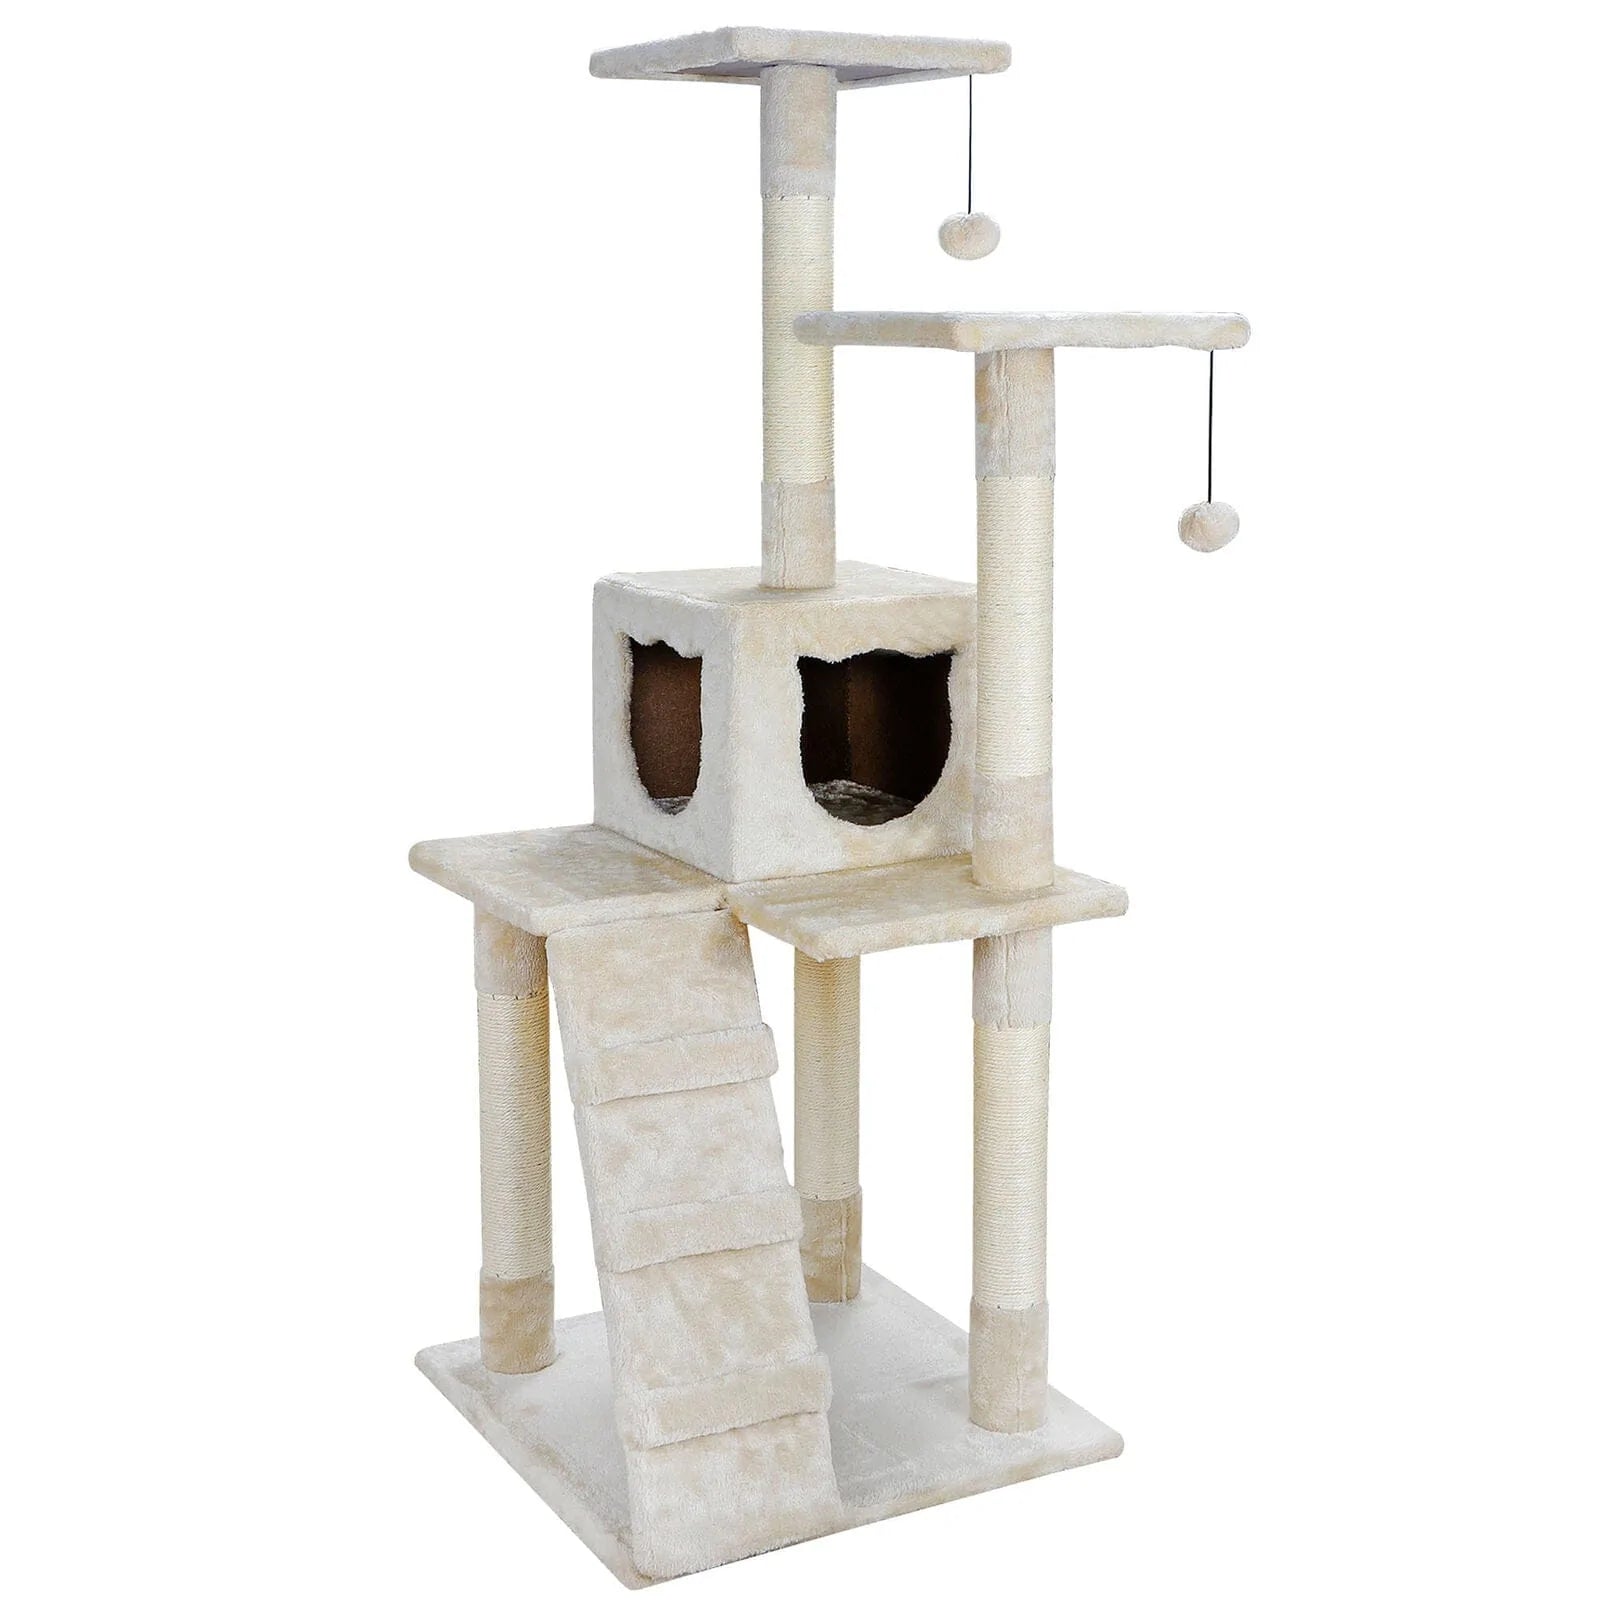 Zenstyle 52" Cat Tree Tower Pet Activity Condo Furniture Scratching Kitty Pet Play House with Sisal-Covered Beige